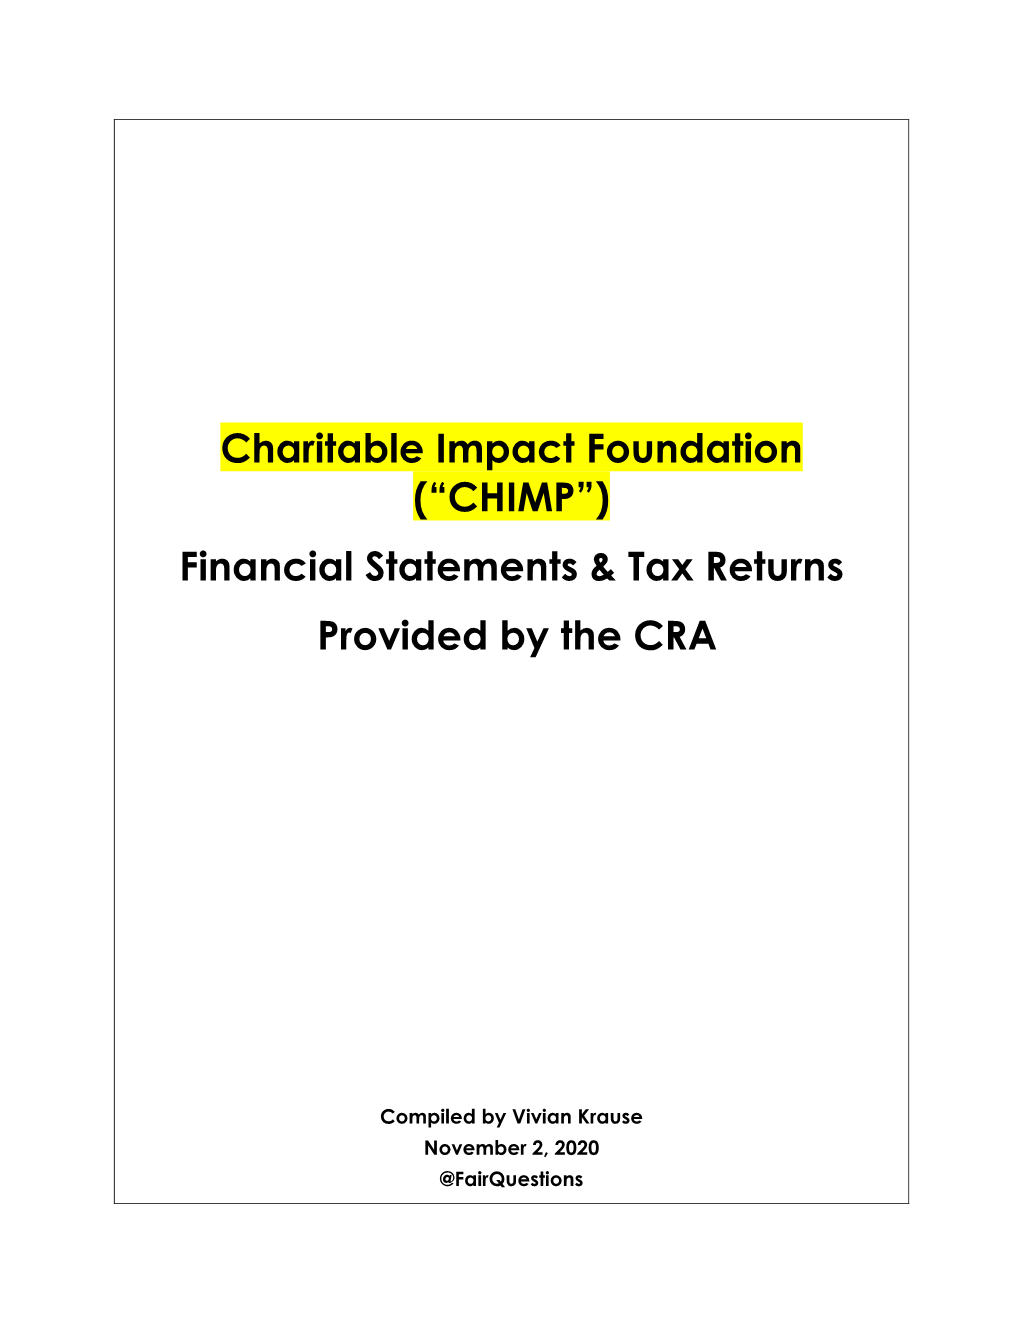 Charitable Impact Foundation (“CHIMP”) Financial Statements & Tax Returns Provided by the CRA